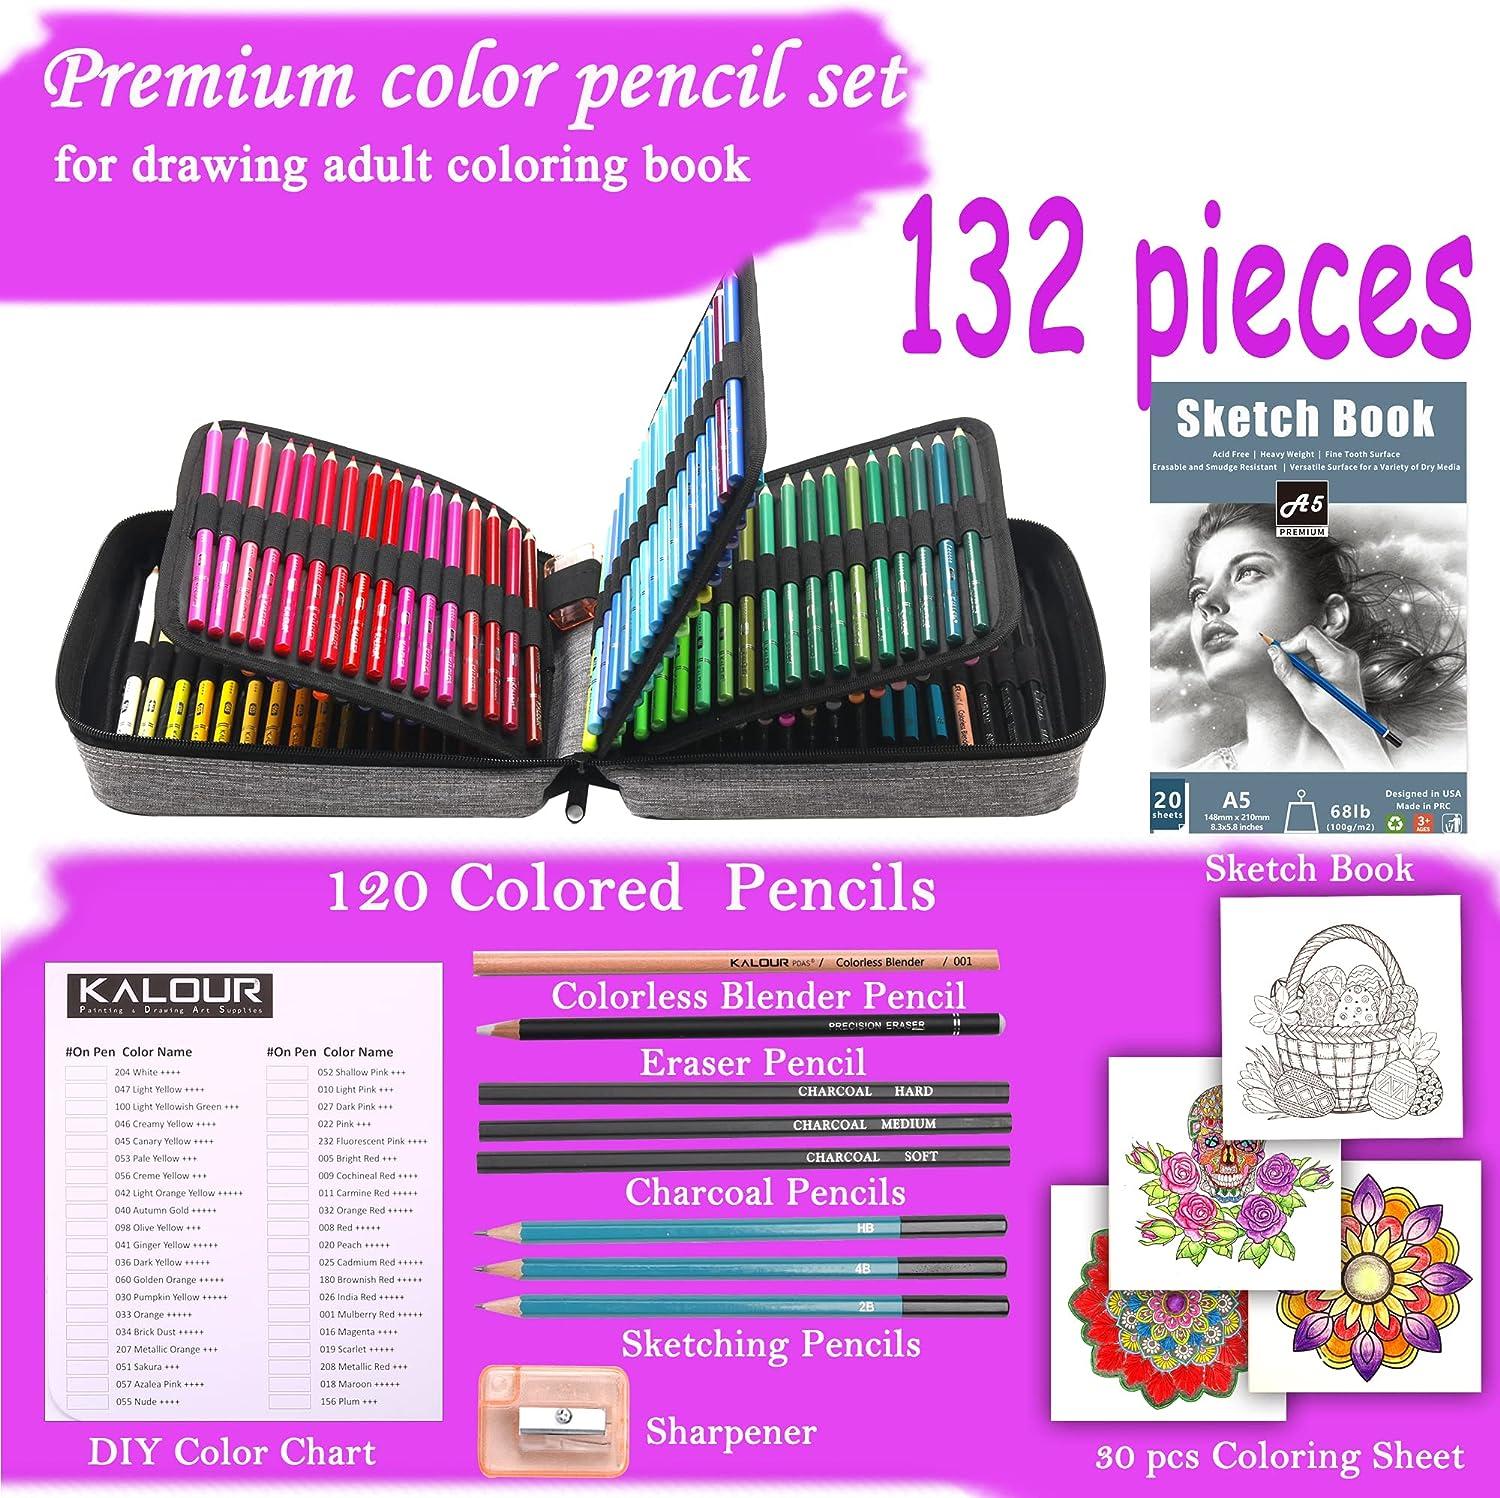  180 Professional Colored Pencils Set with Vibrant Colors - For  Sketching, Shading, Coloring Books - Gift Box for Beginners, Adults, Artists  : Arts, Crafts & Sewing